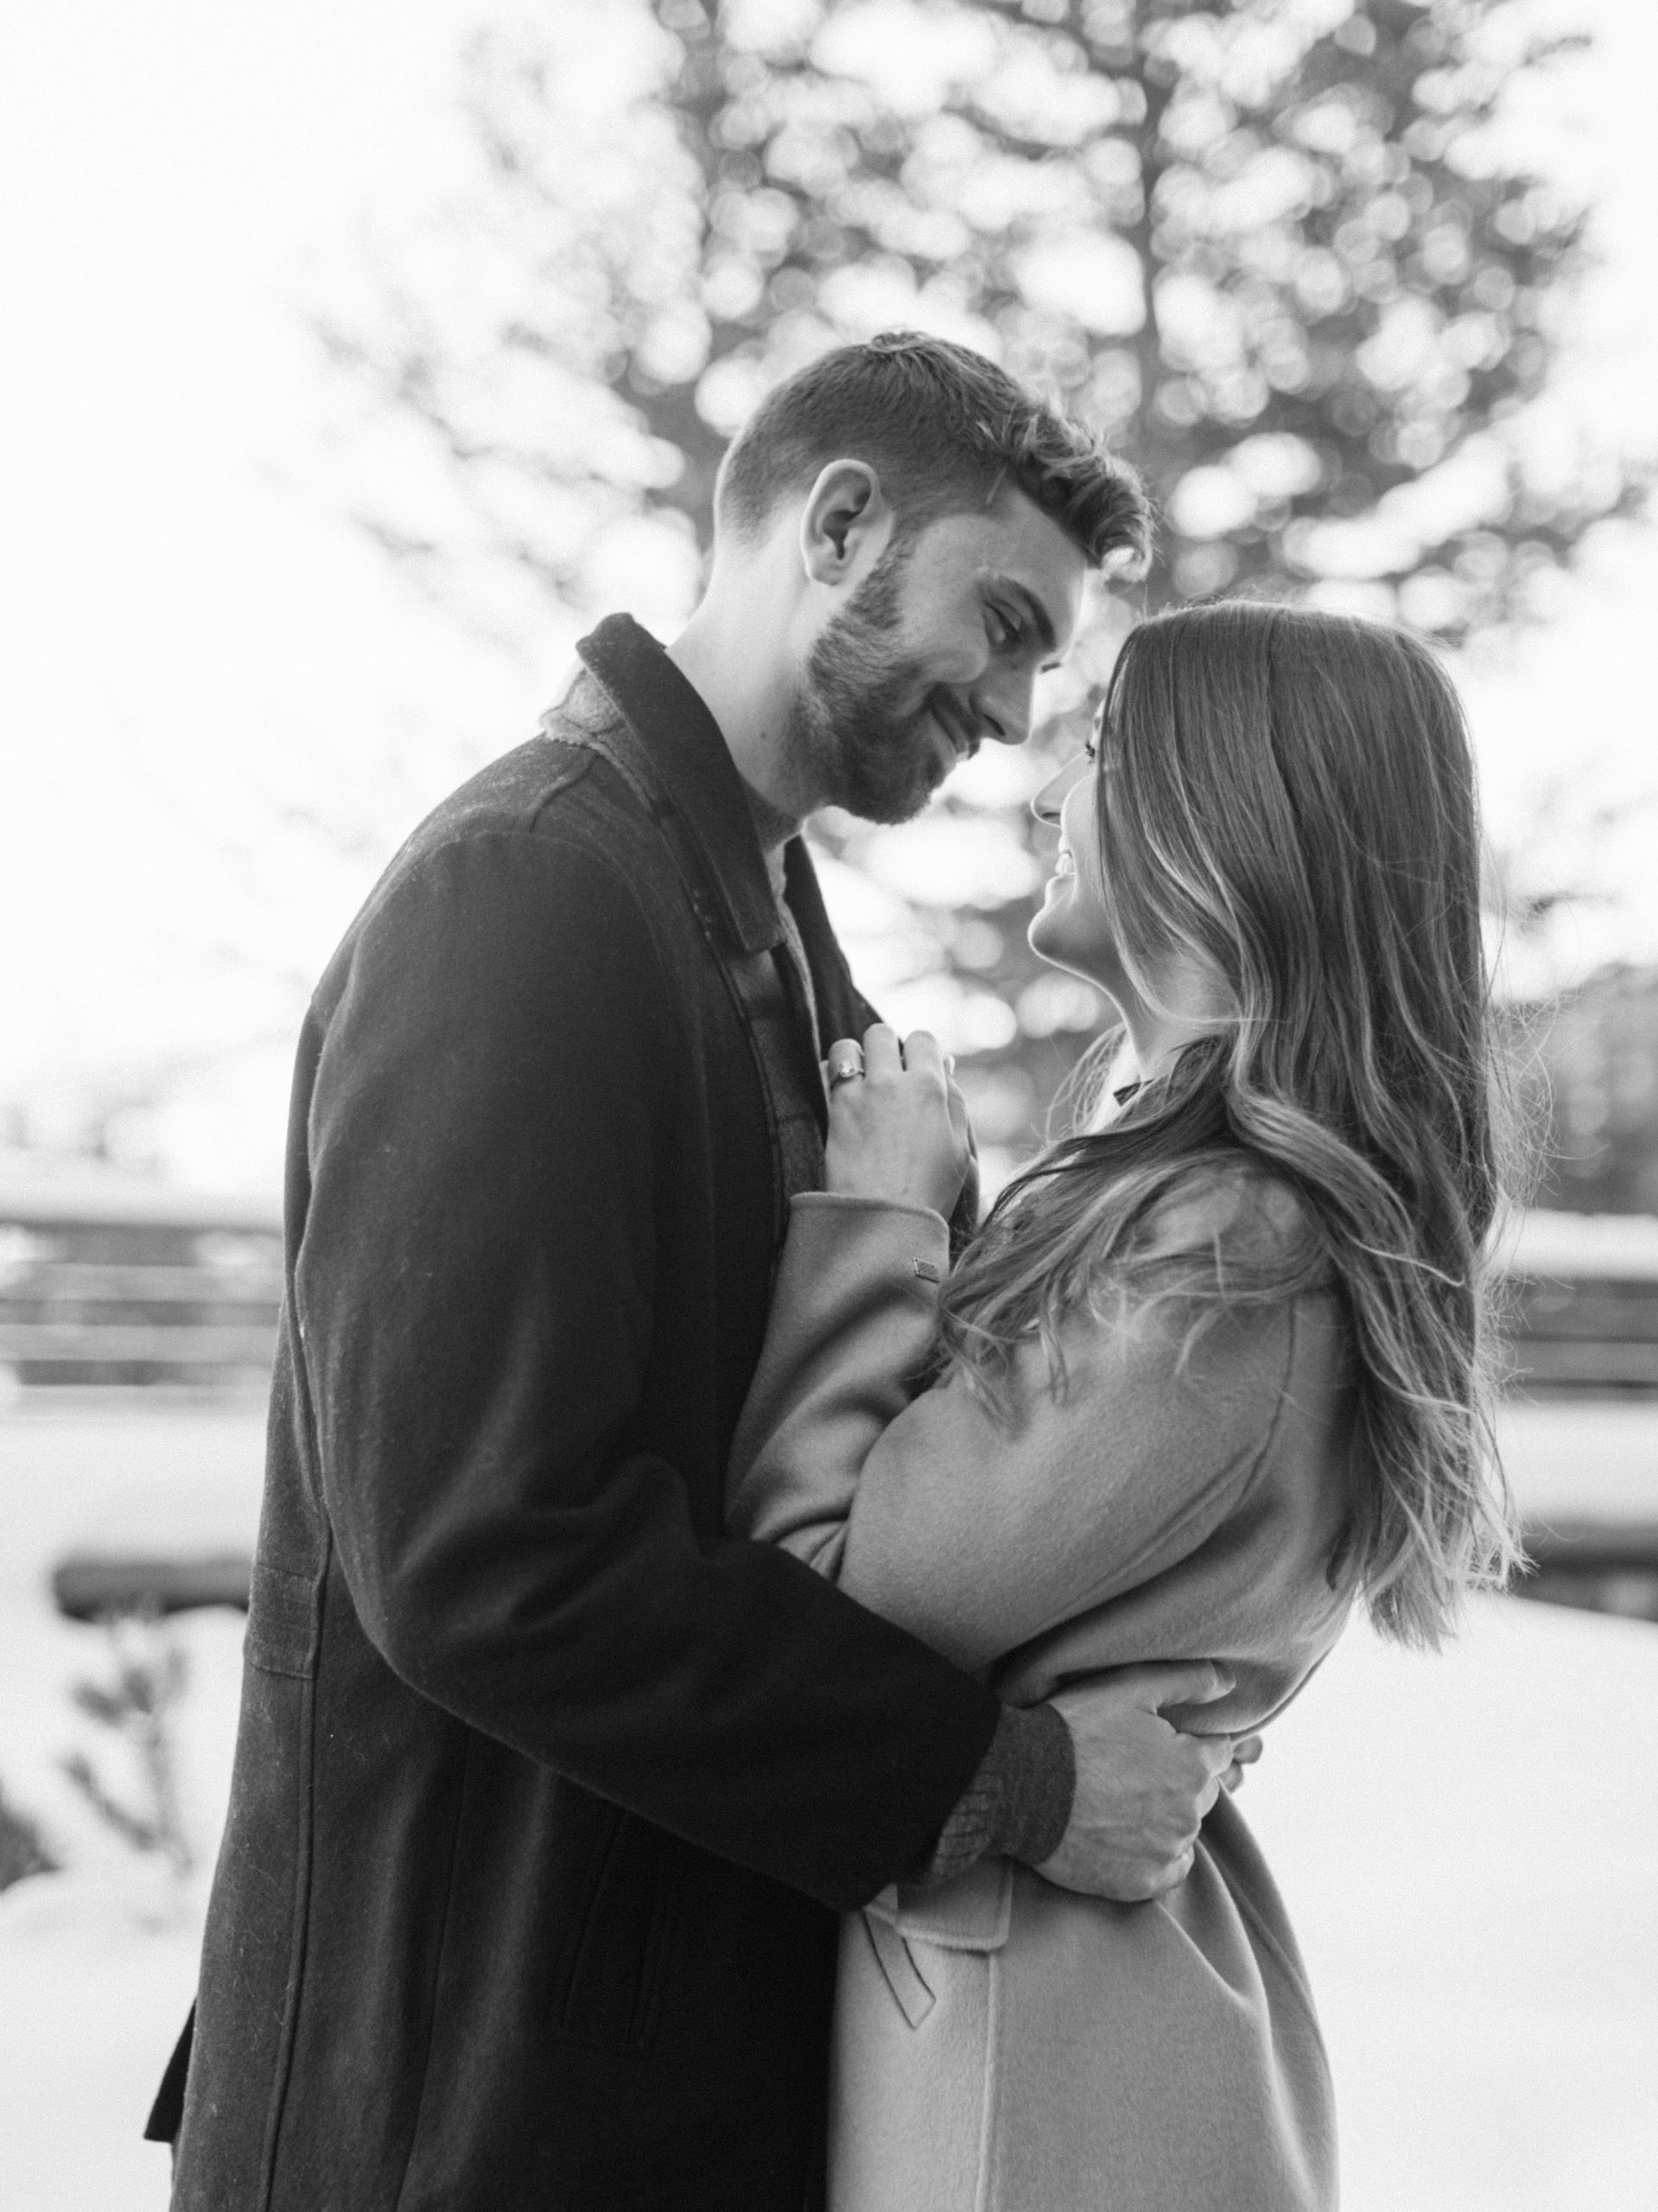 downtown winter engagement photos in park city utah. photo taken by Megan Robinson Photography